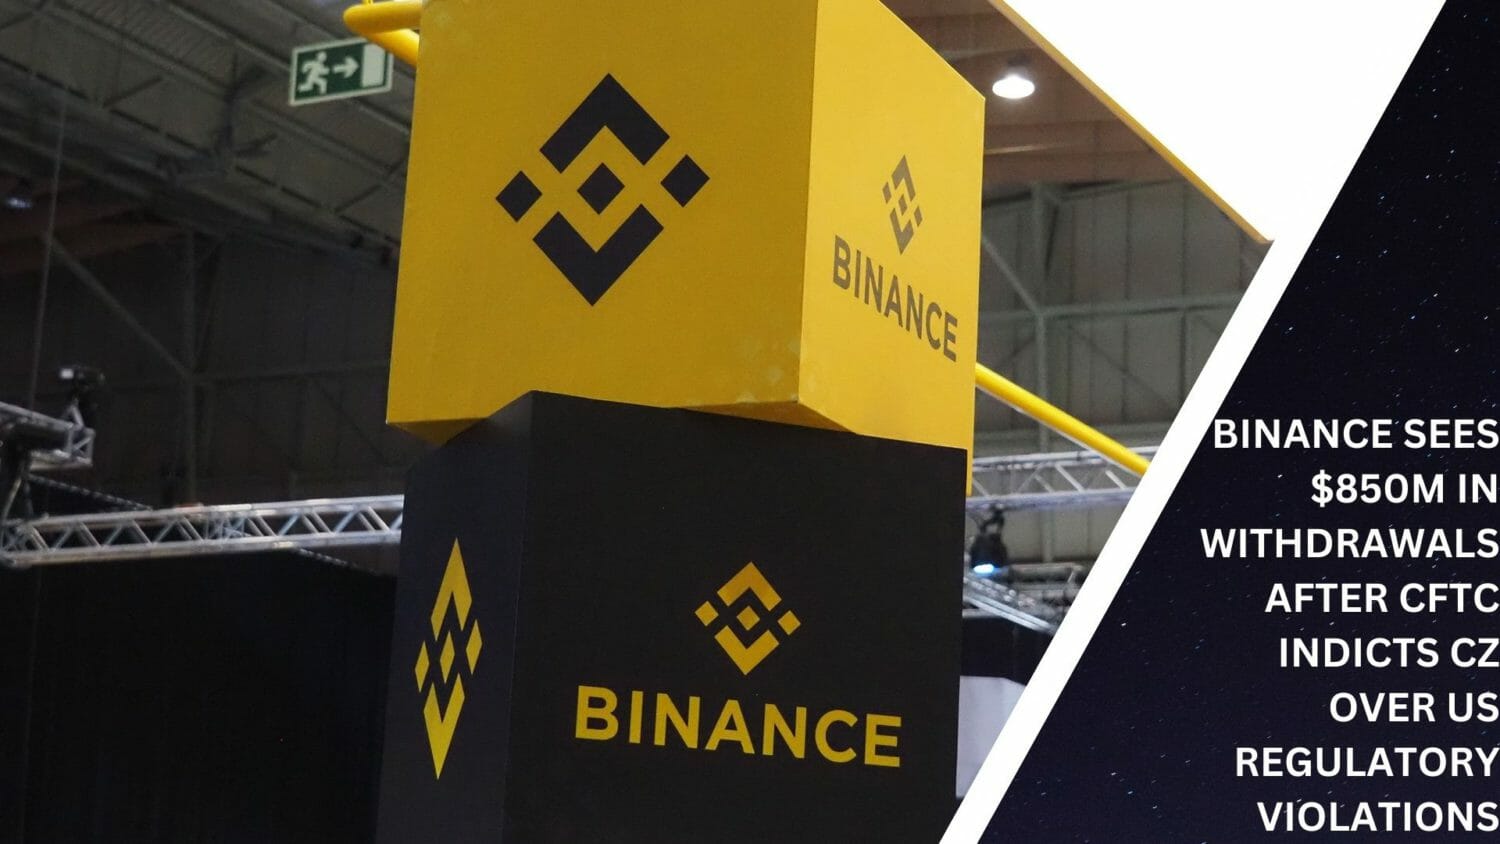 Binance Sees $850M In Withdrawals After Cftc Indicts Cz Over Us Regulatory Violations